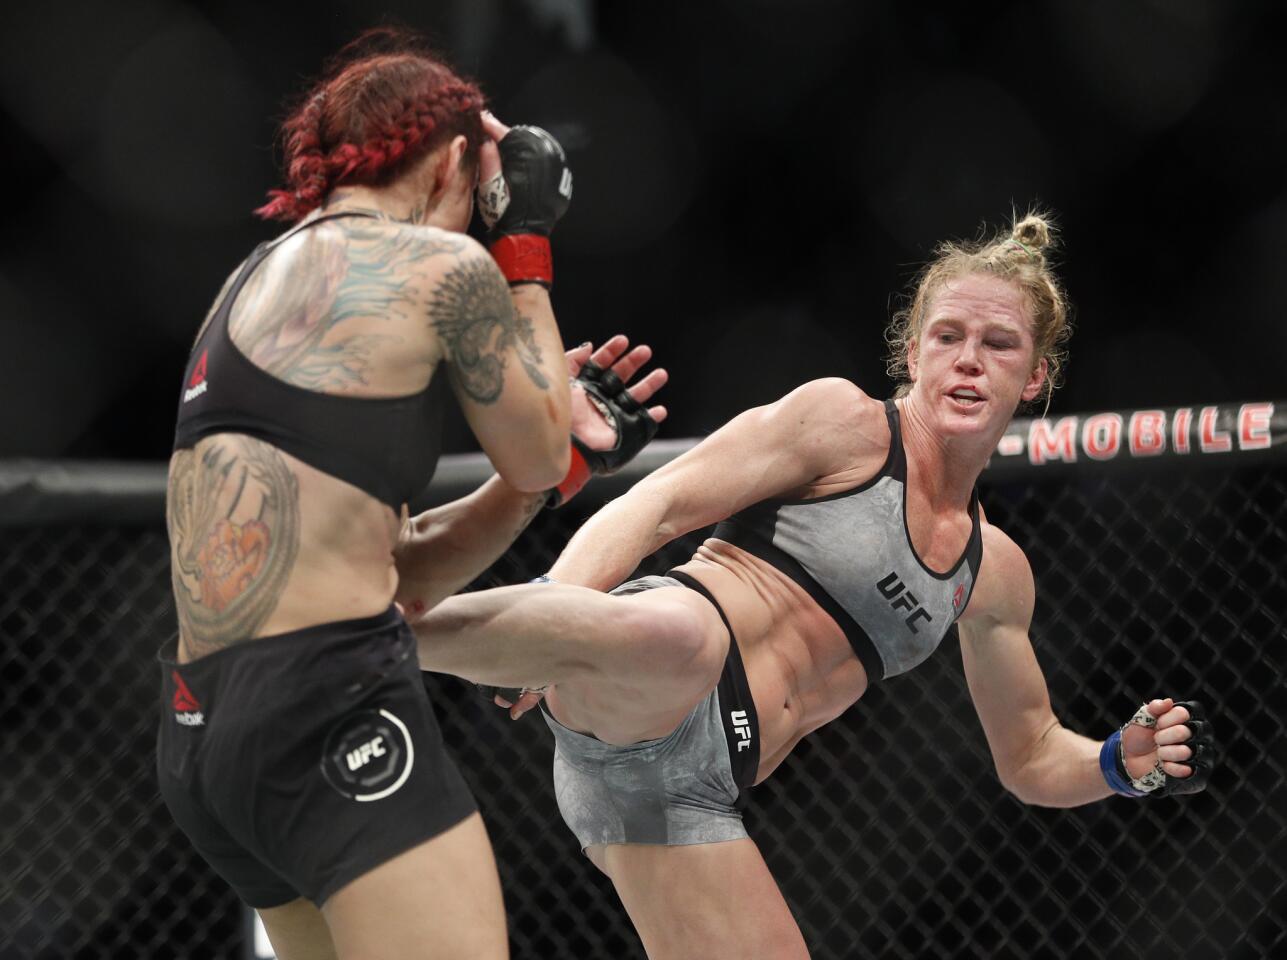 Holly Holm kicks Cris Cyborg during a featherweight championship mixed martial arts bout at UFC 219.